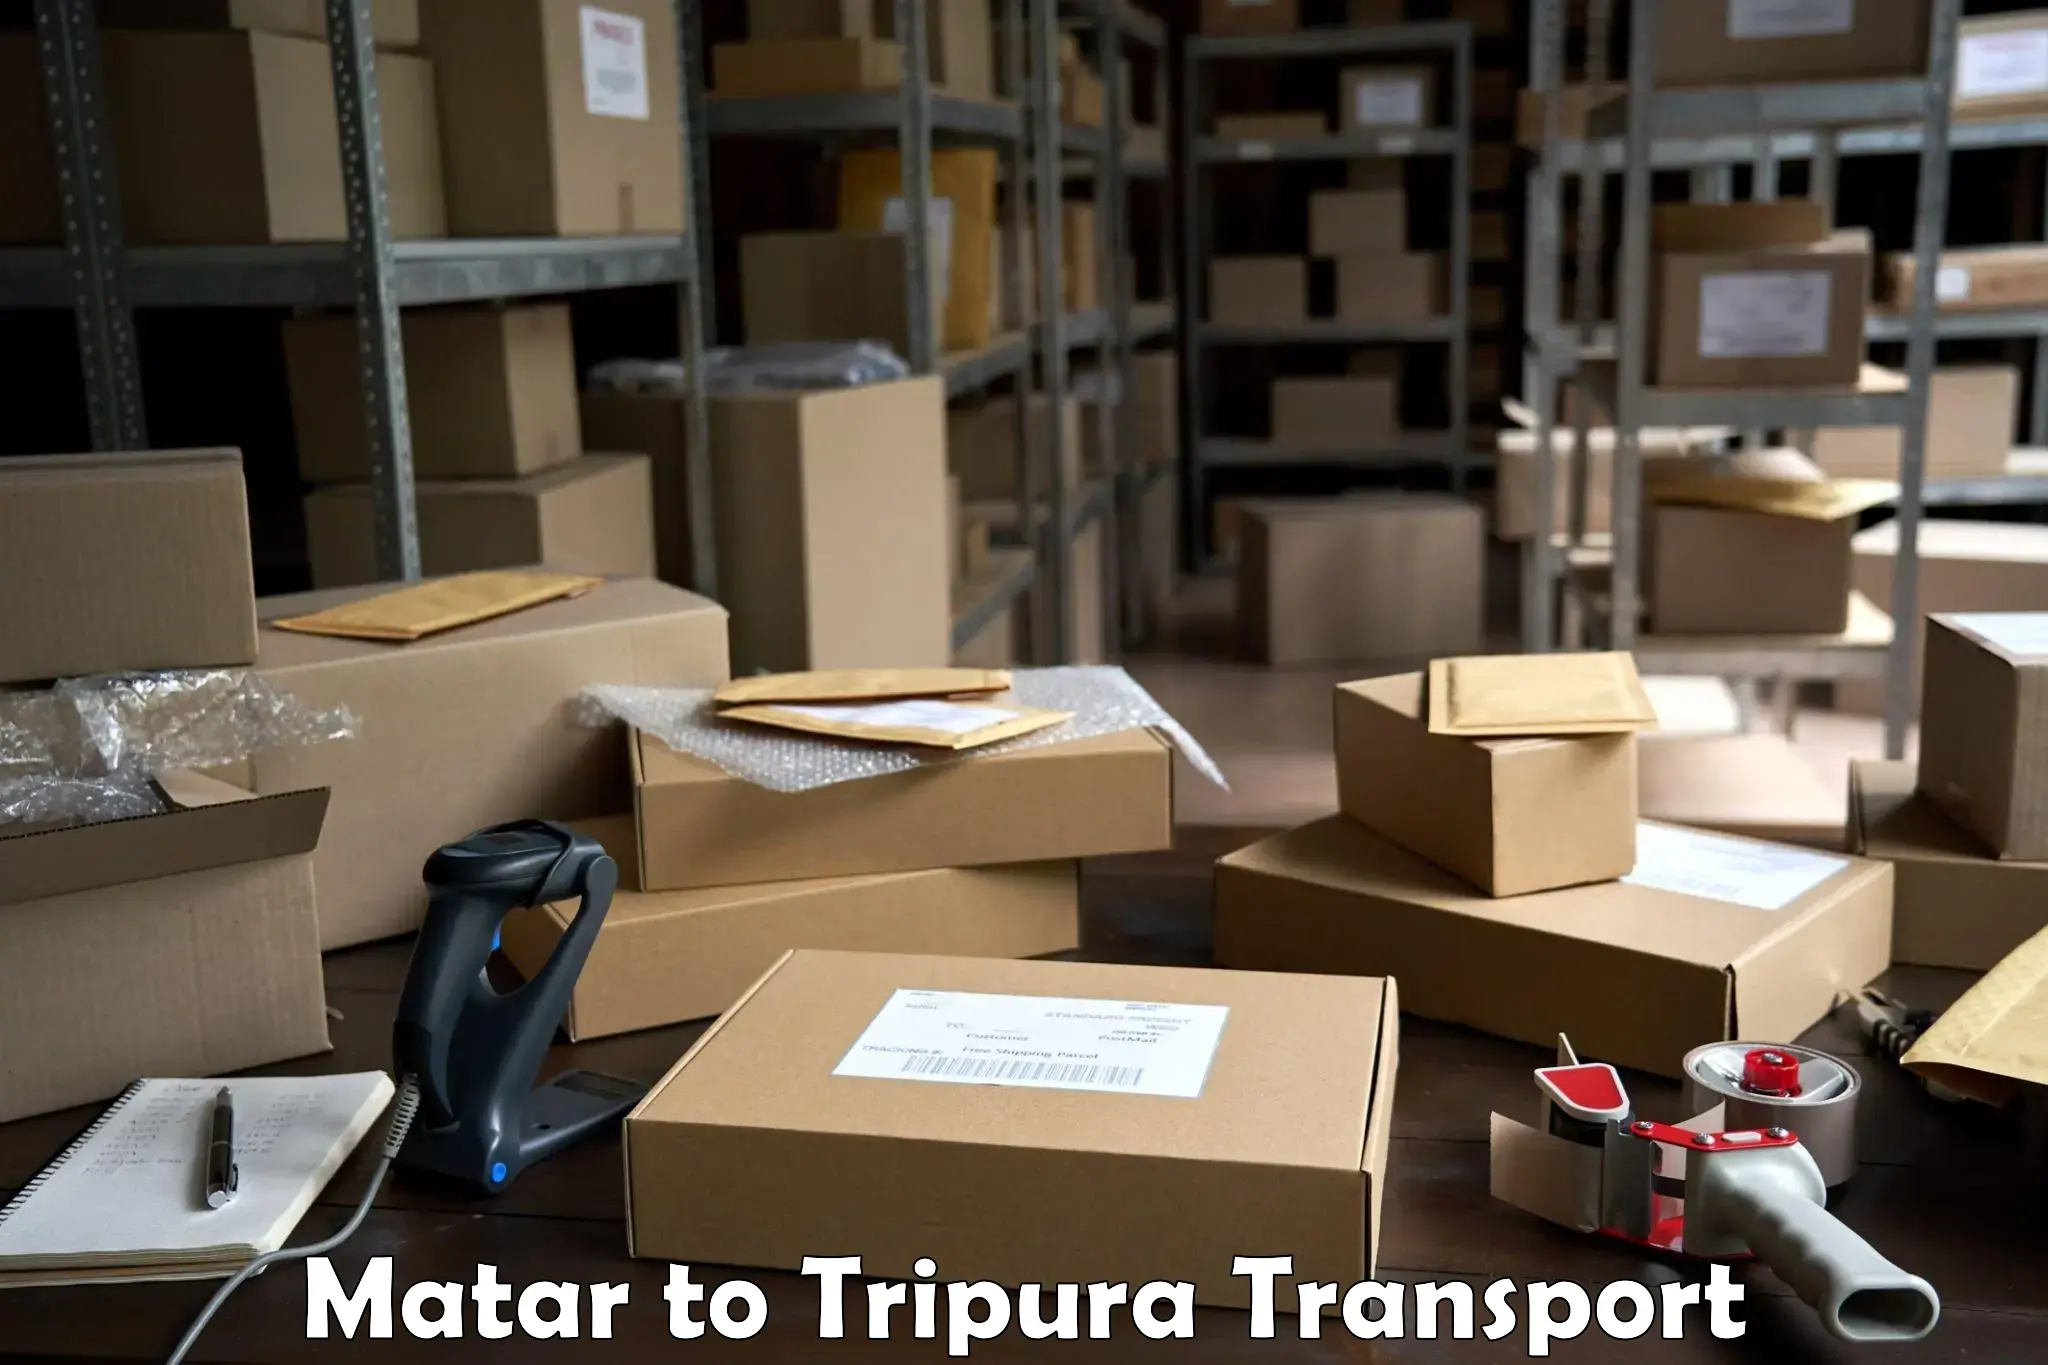 Nationwide transport services Matar to Tripura